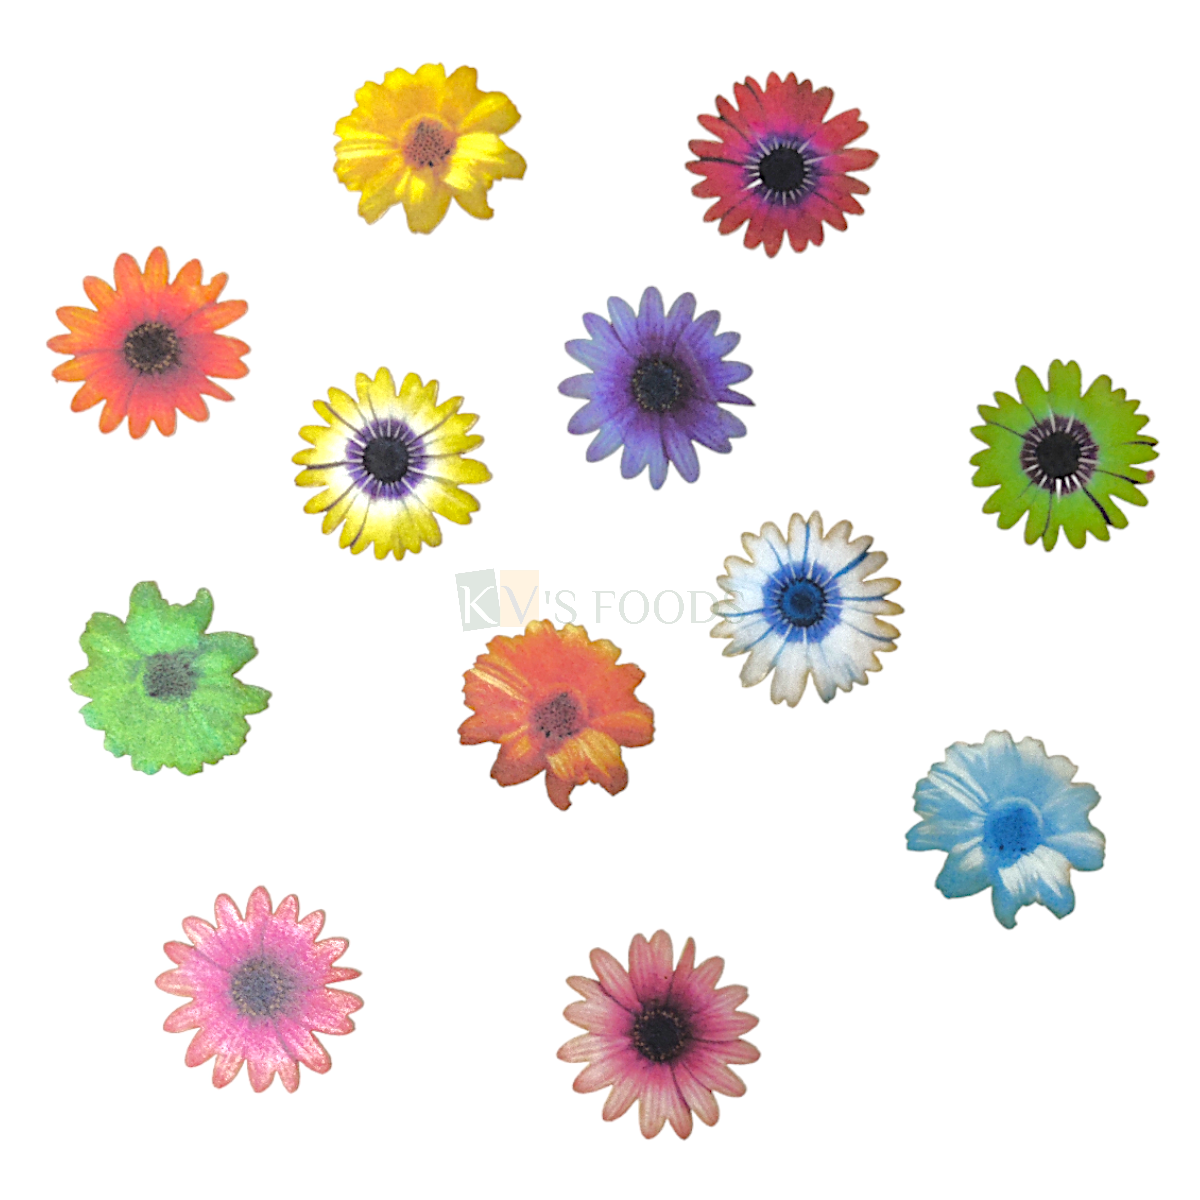 23 PCs Colourful Mix Design Xenia Flowers Theme Pre-Cut Pre-Printed Edible Wafer Paper Cutout Cake Decorations Kids Girl Happy Birthday Cake Topper Stick-on Cake Decor Wedding Anniversary Cakes